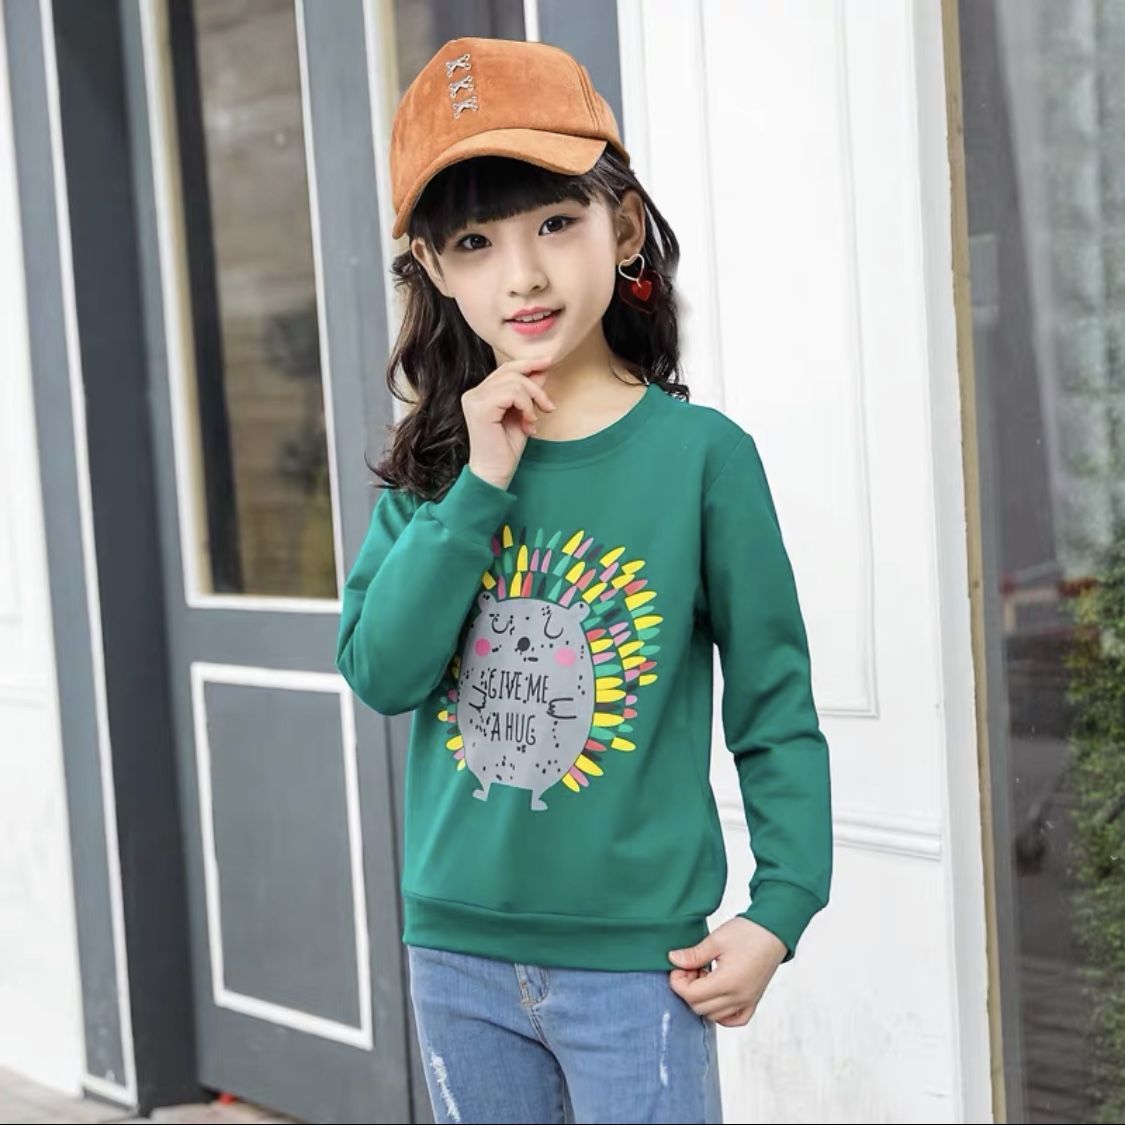 Girls' Plush sweater children's thickened women's new top autumn and winter warm large, medium and small bottoming shirt foreign style long sleeves